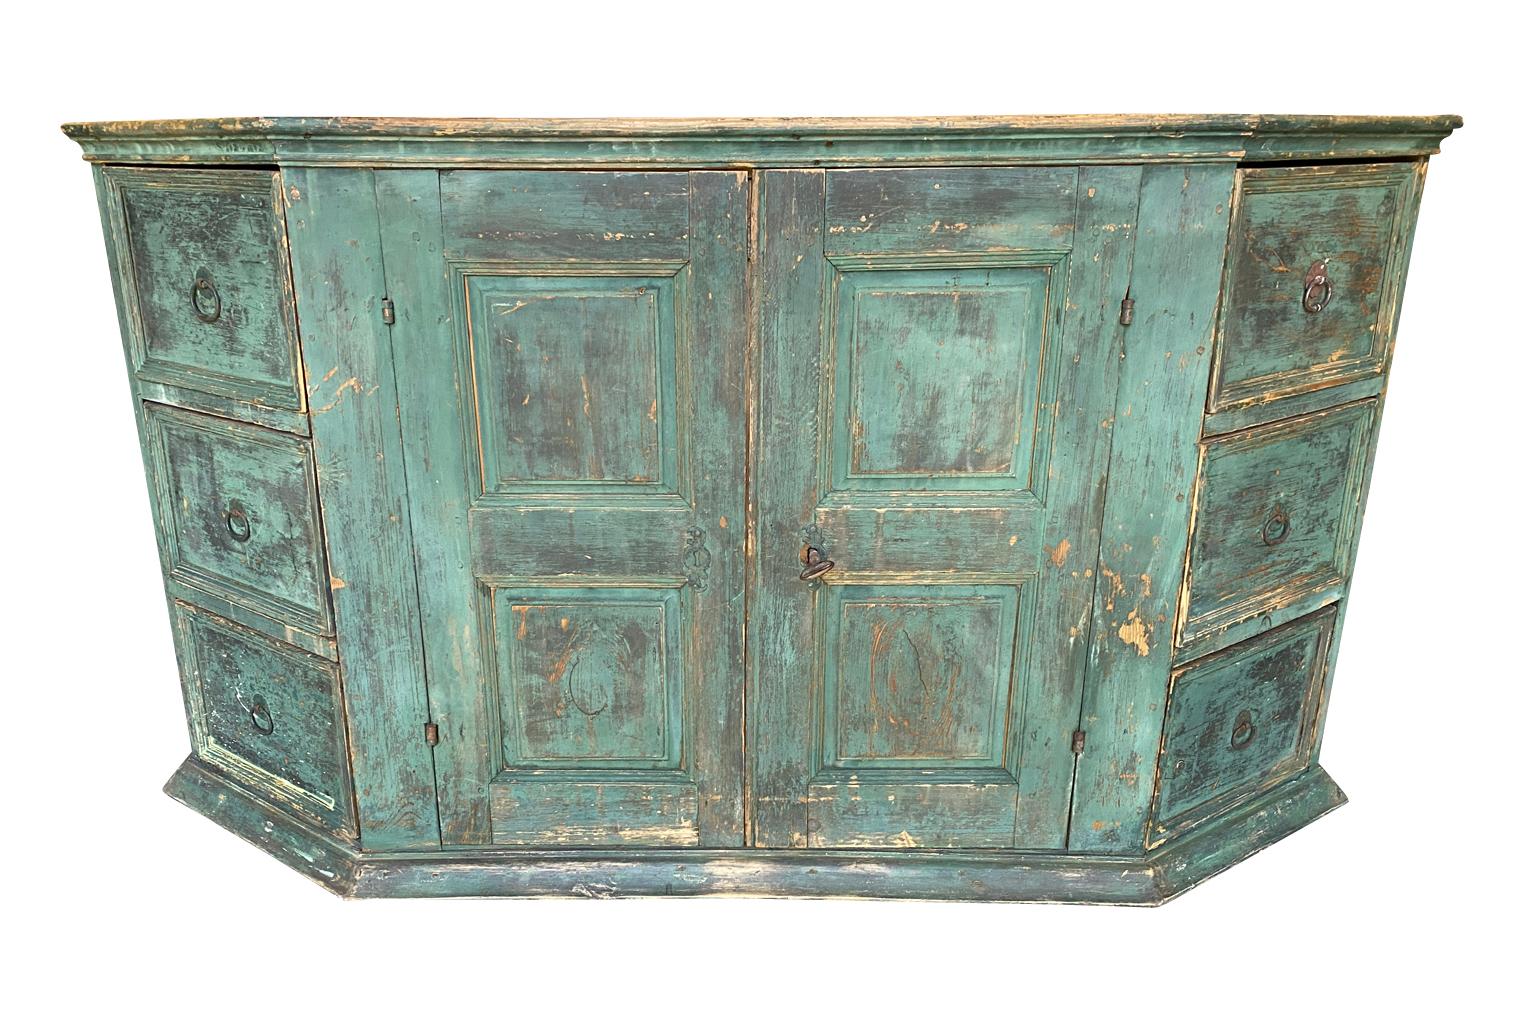 Painted Exceptional 17th Century Sacristy Credenza